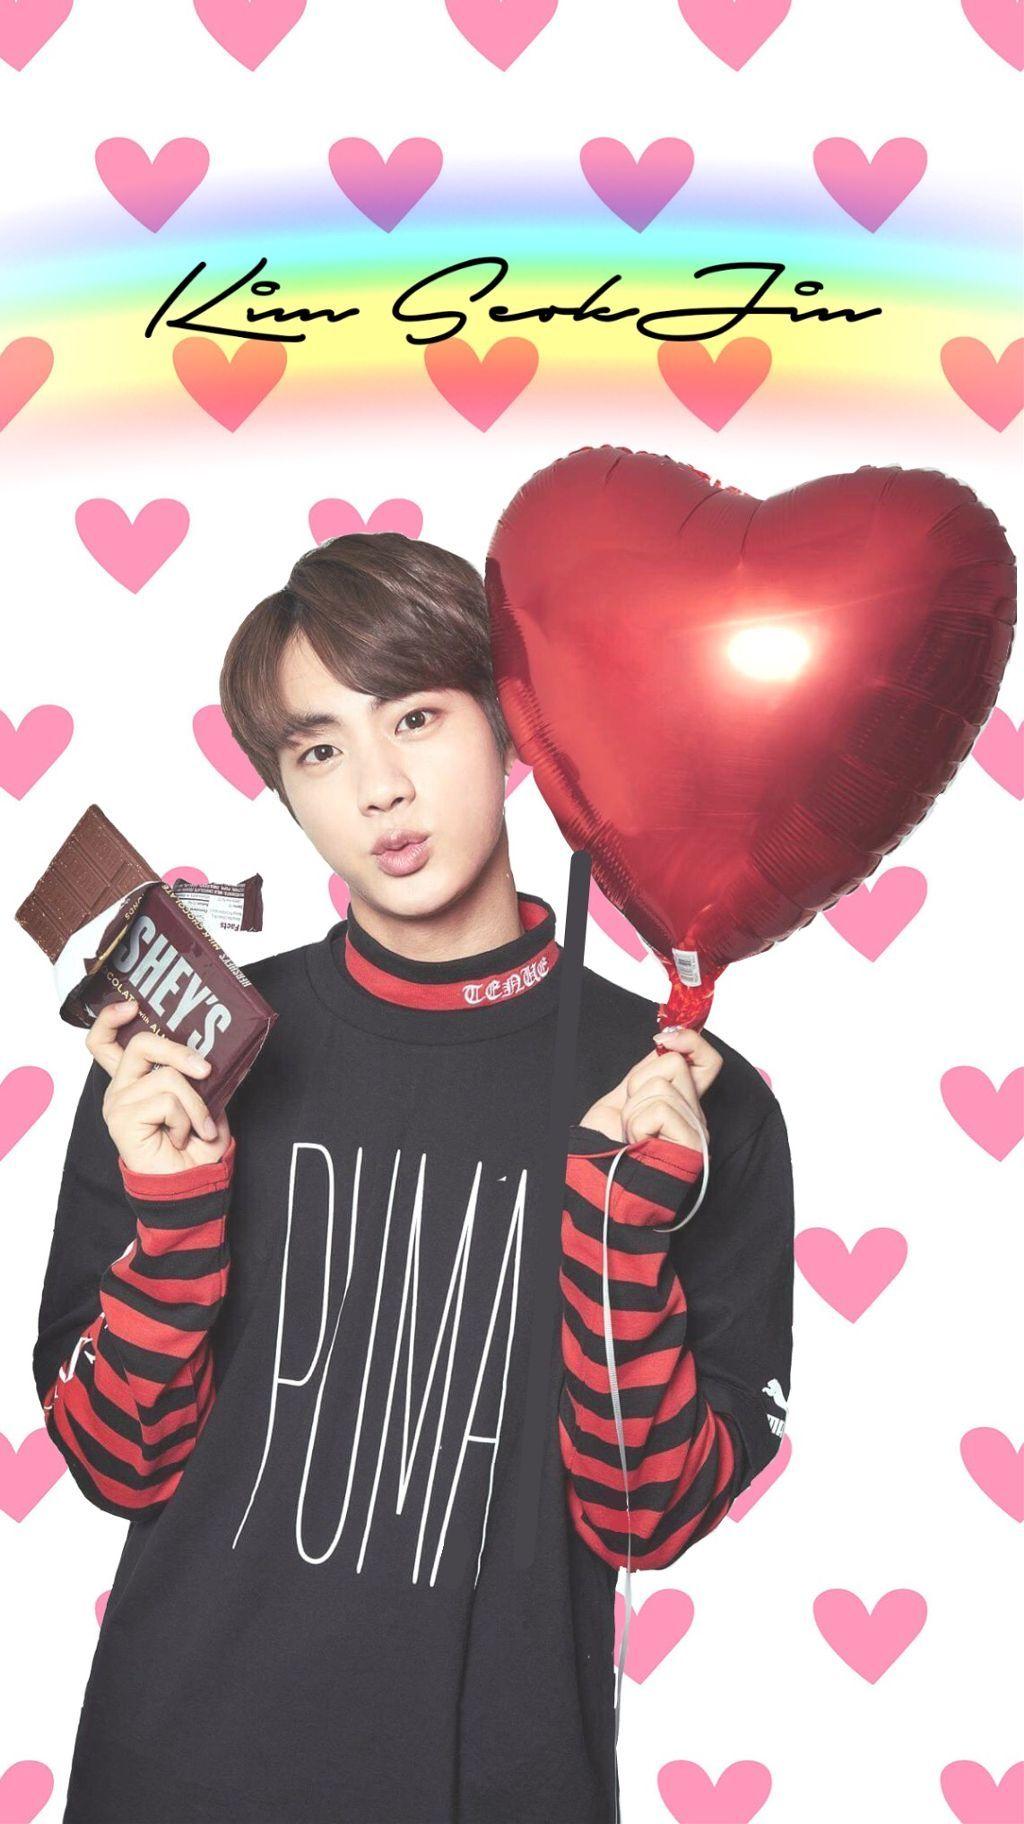 DO NOT EDIT THIS PICTURE. bts jin kimseokjin wallpaper